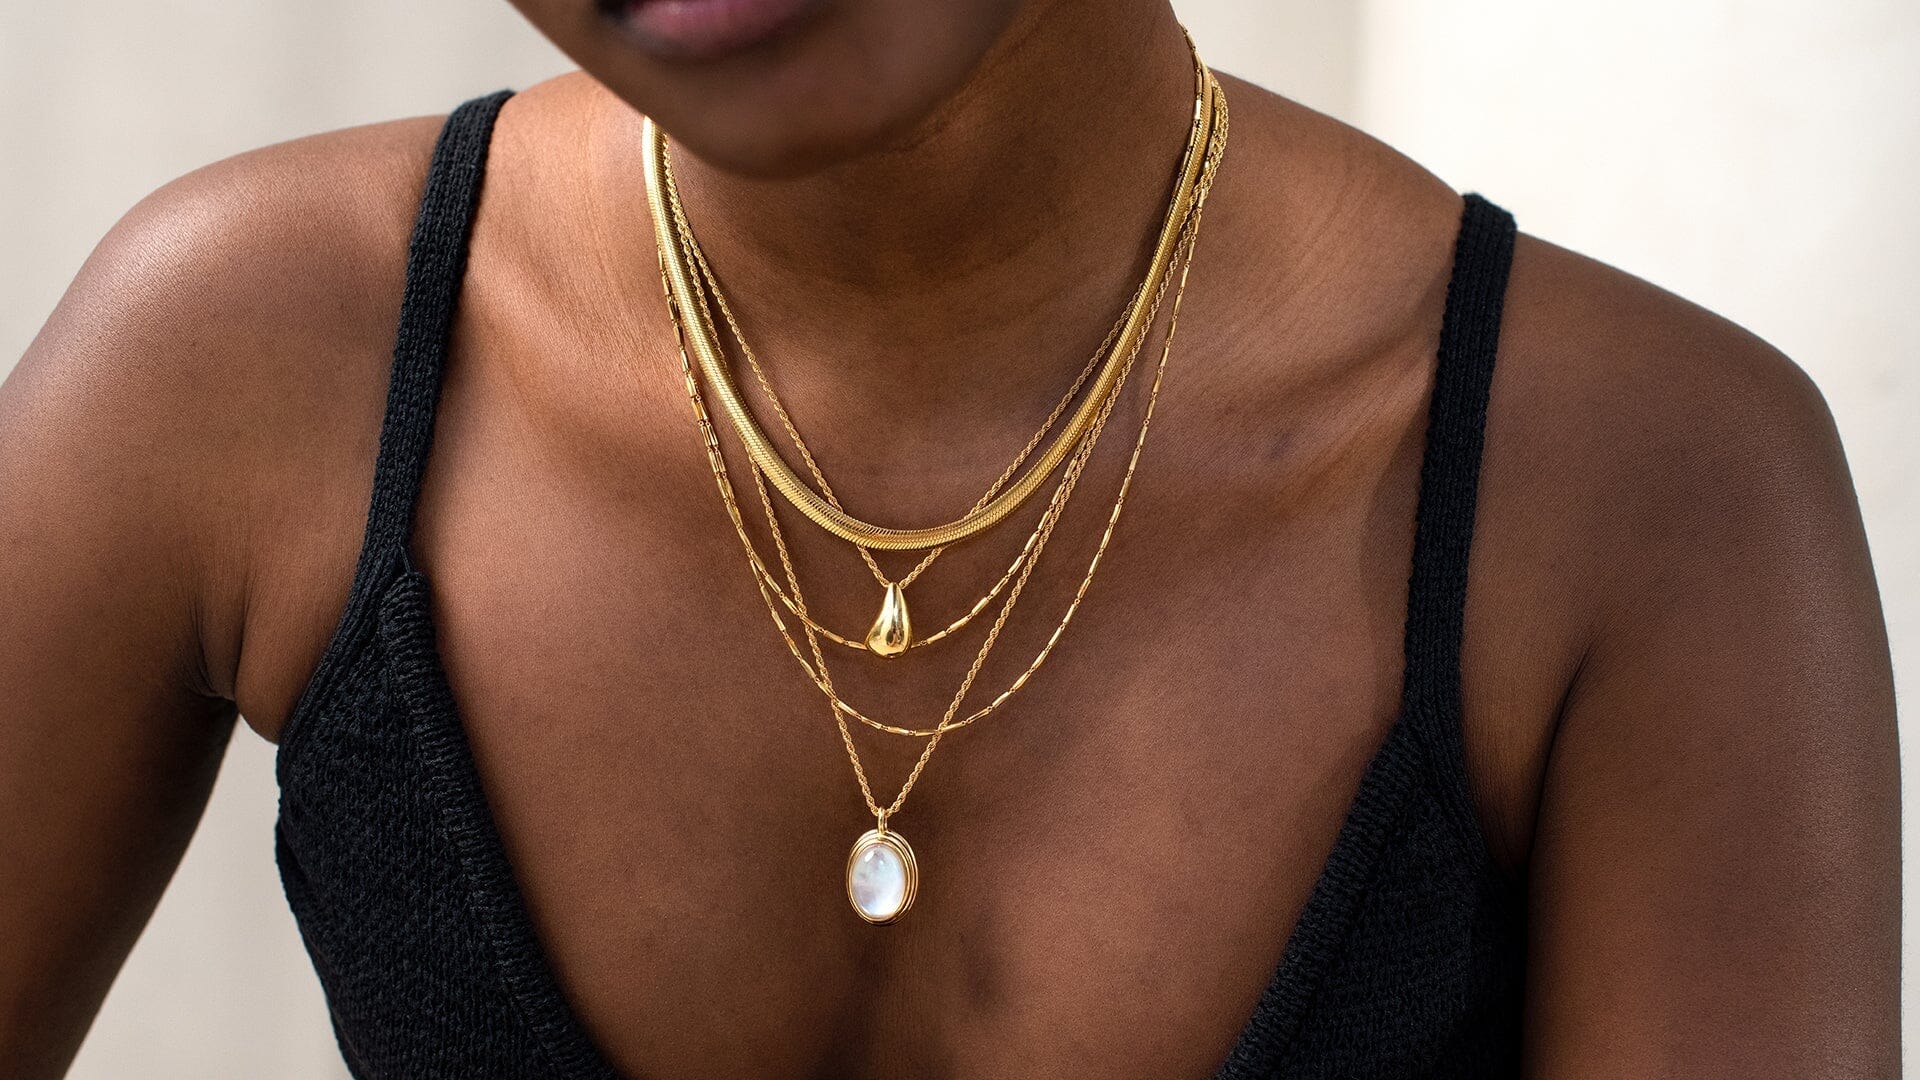 Your Ultimate Guide to Layering Necklaces & Jewelry 